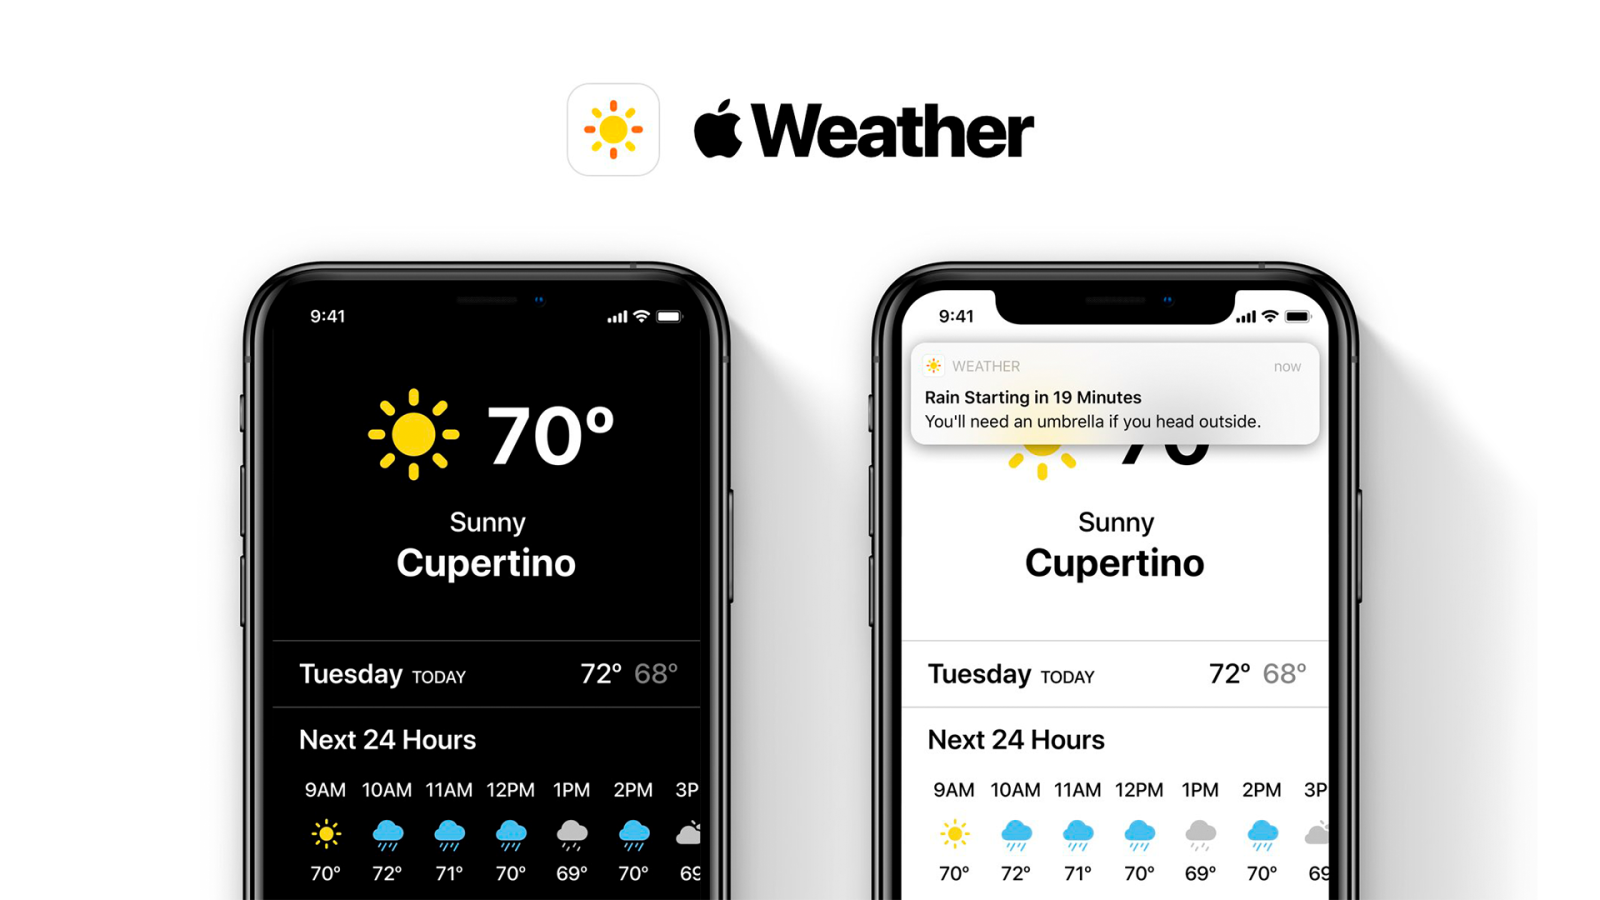 Concept Imagines A Redesigned Weather App For Ios Based On Dark